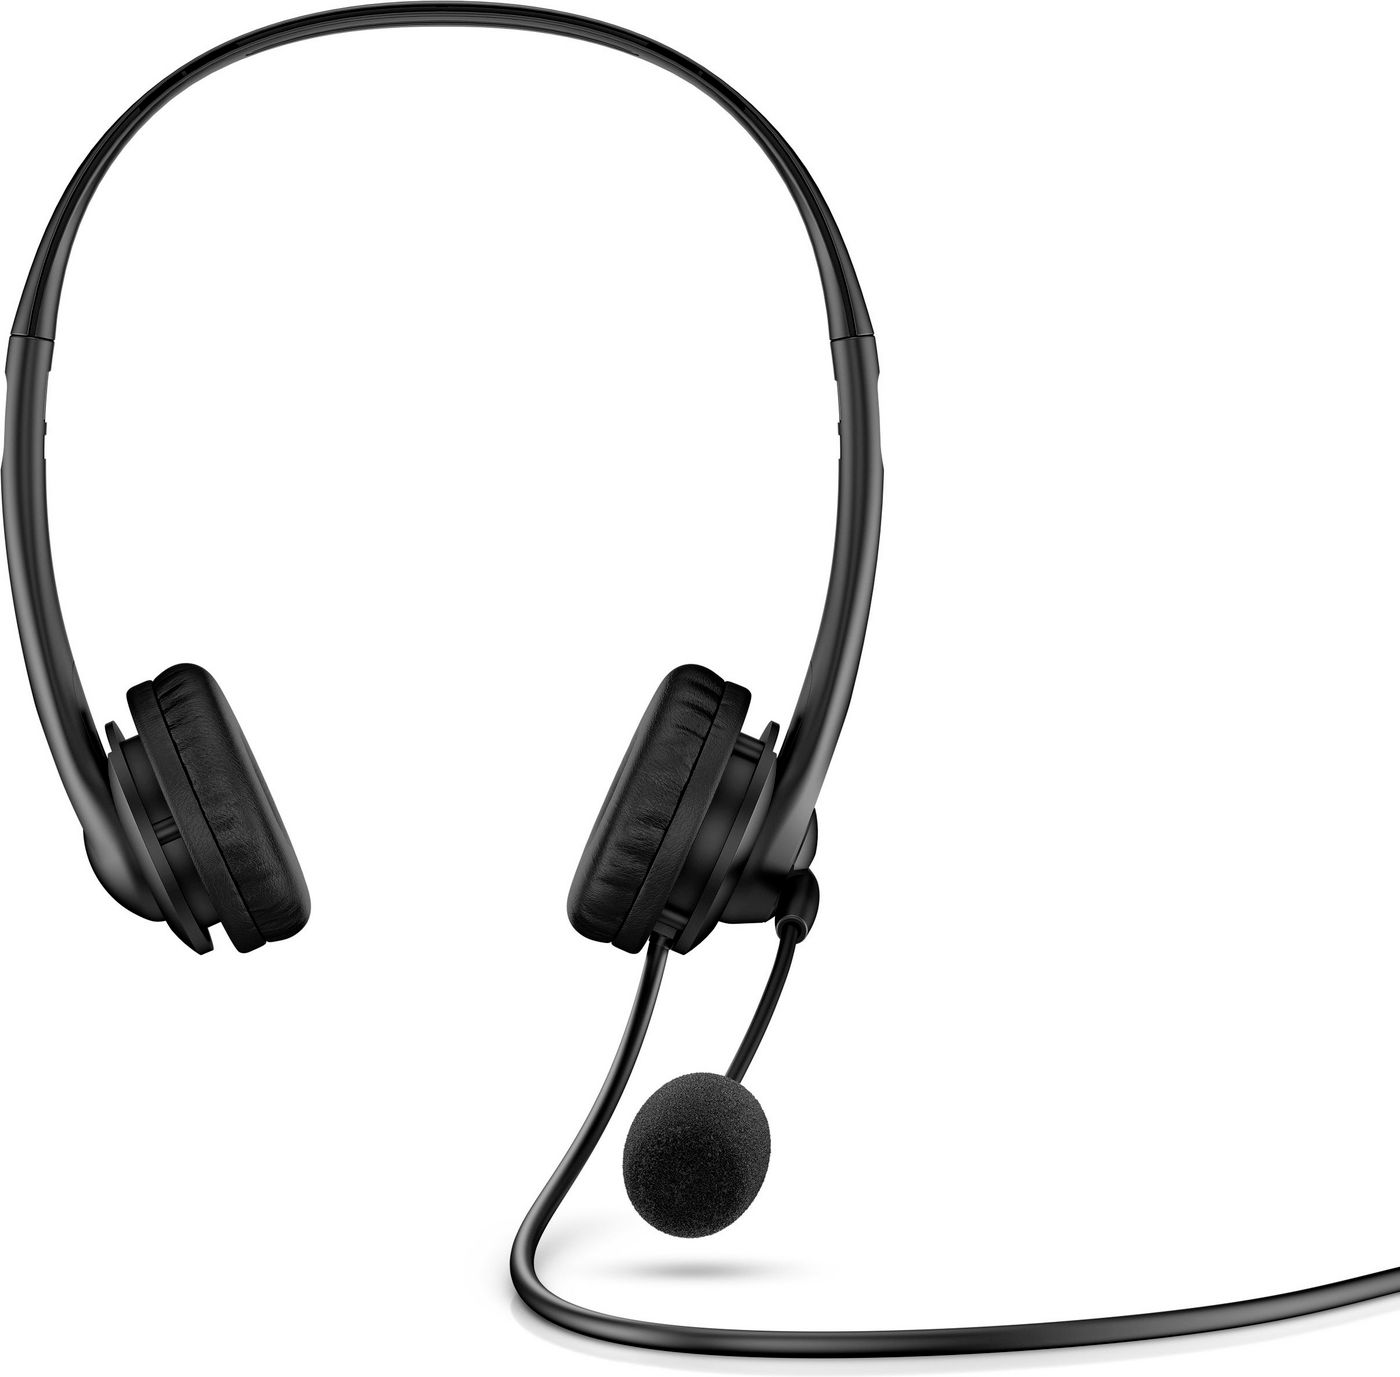 Stereo Usb Headset G2 Wired